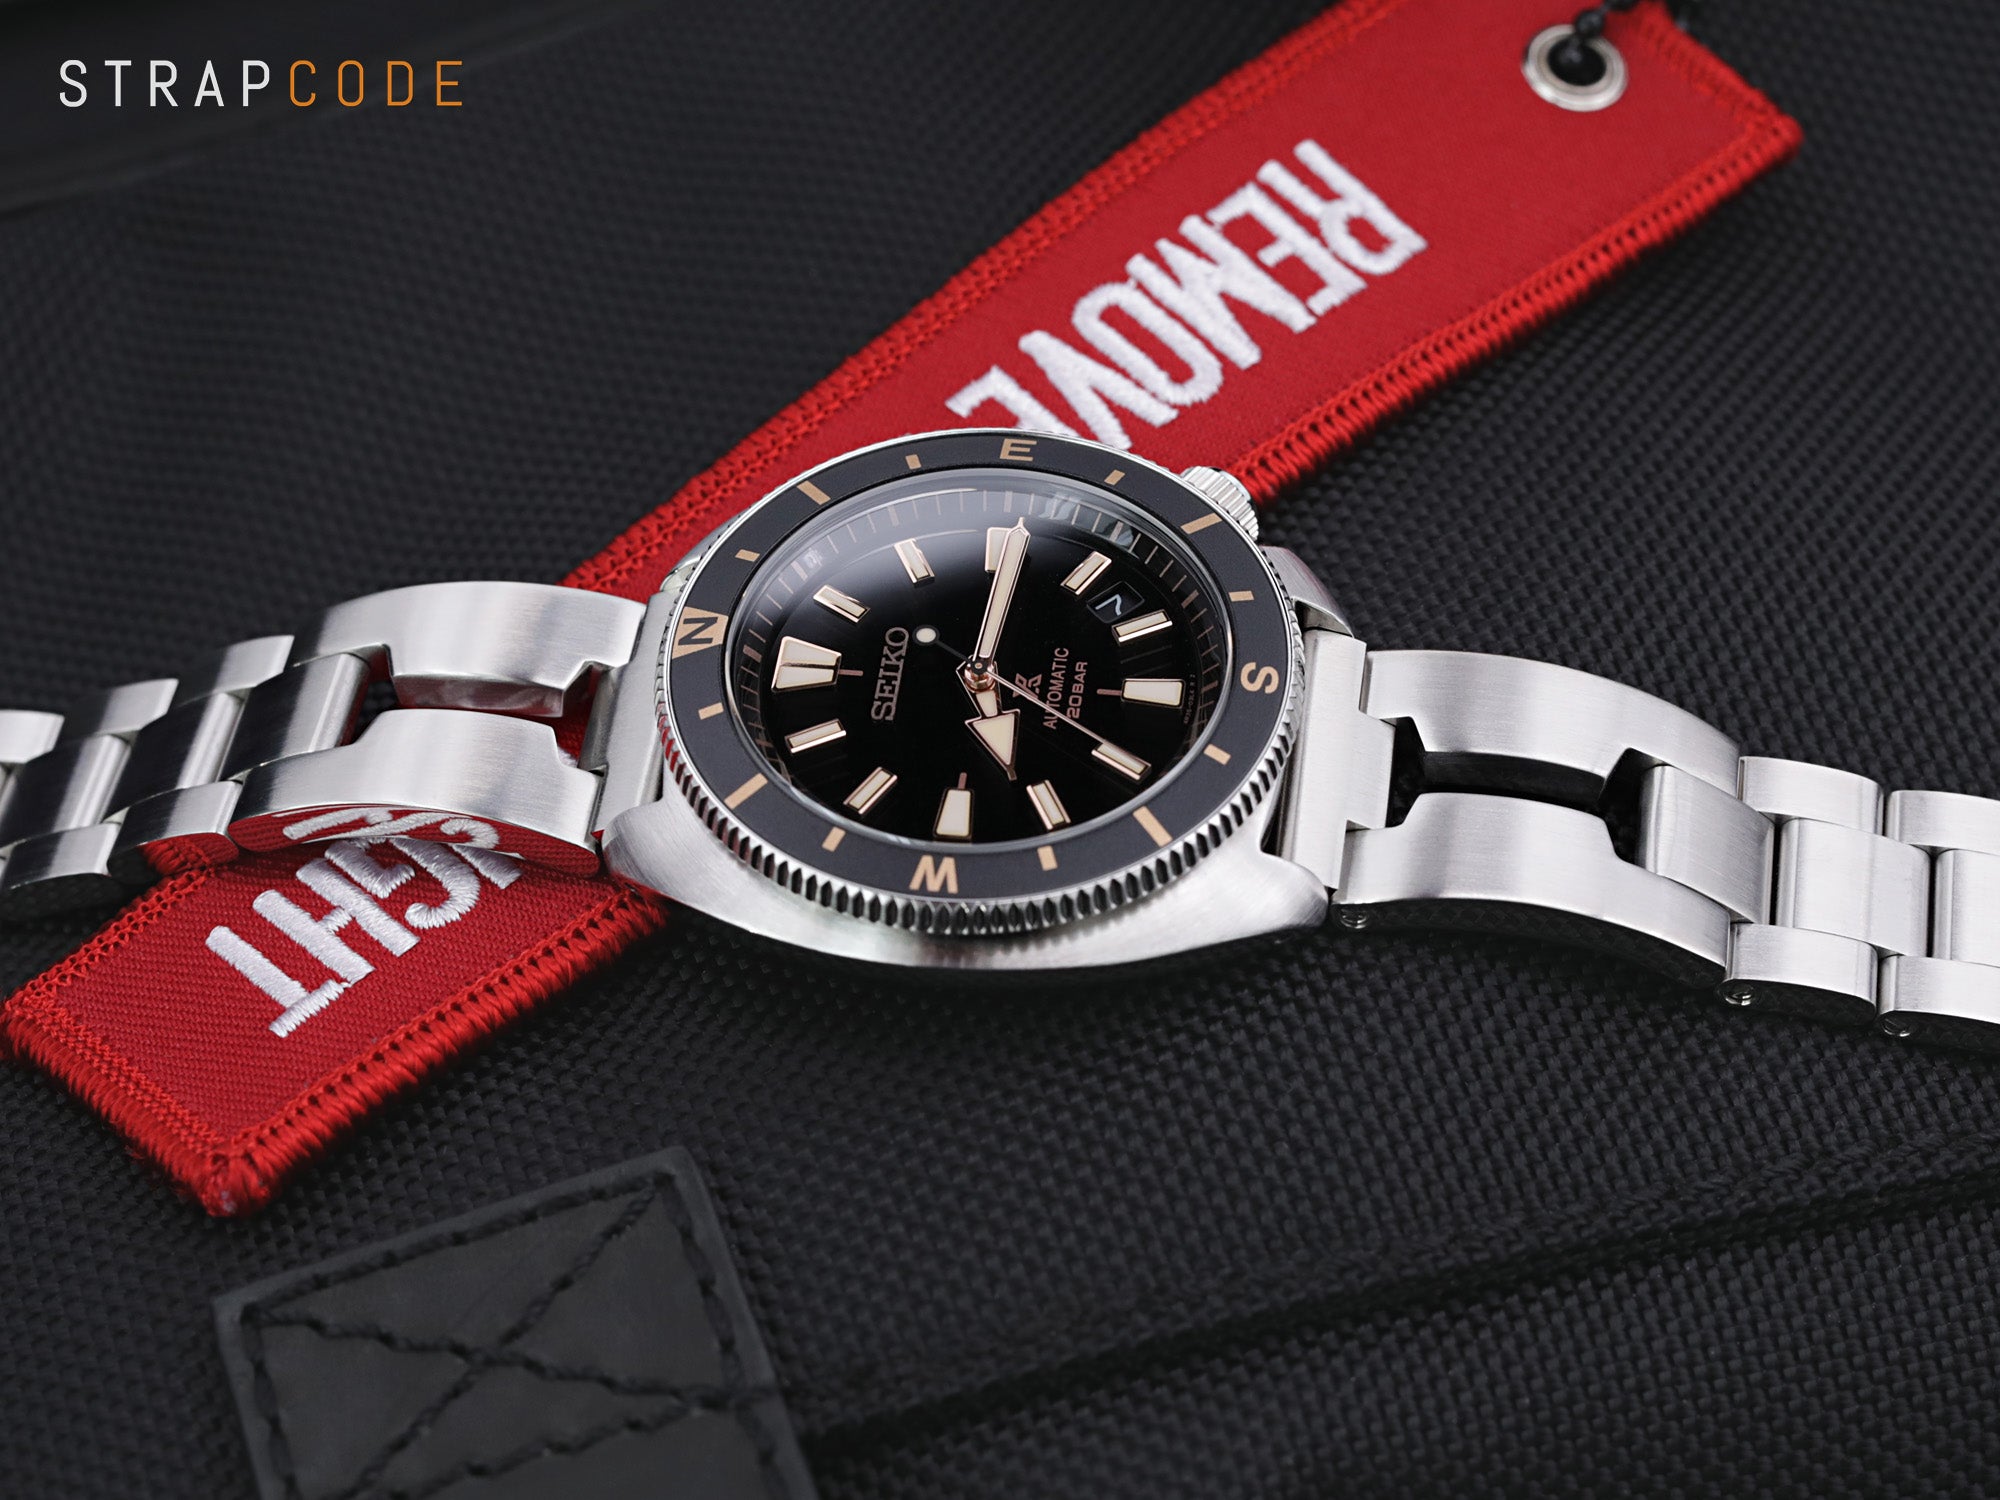 Seiko Tortoise Land SRPG17K1 watch has been enhanced with a 20mm Retro Razor band by Strapcode 